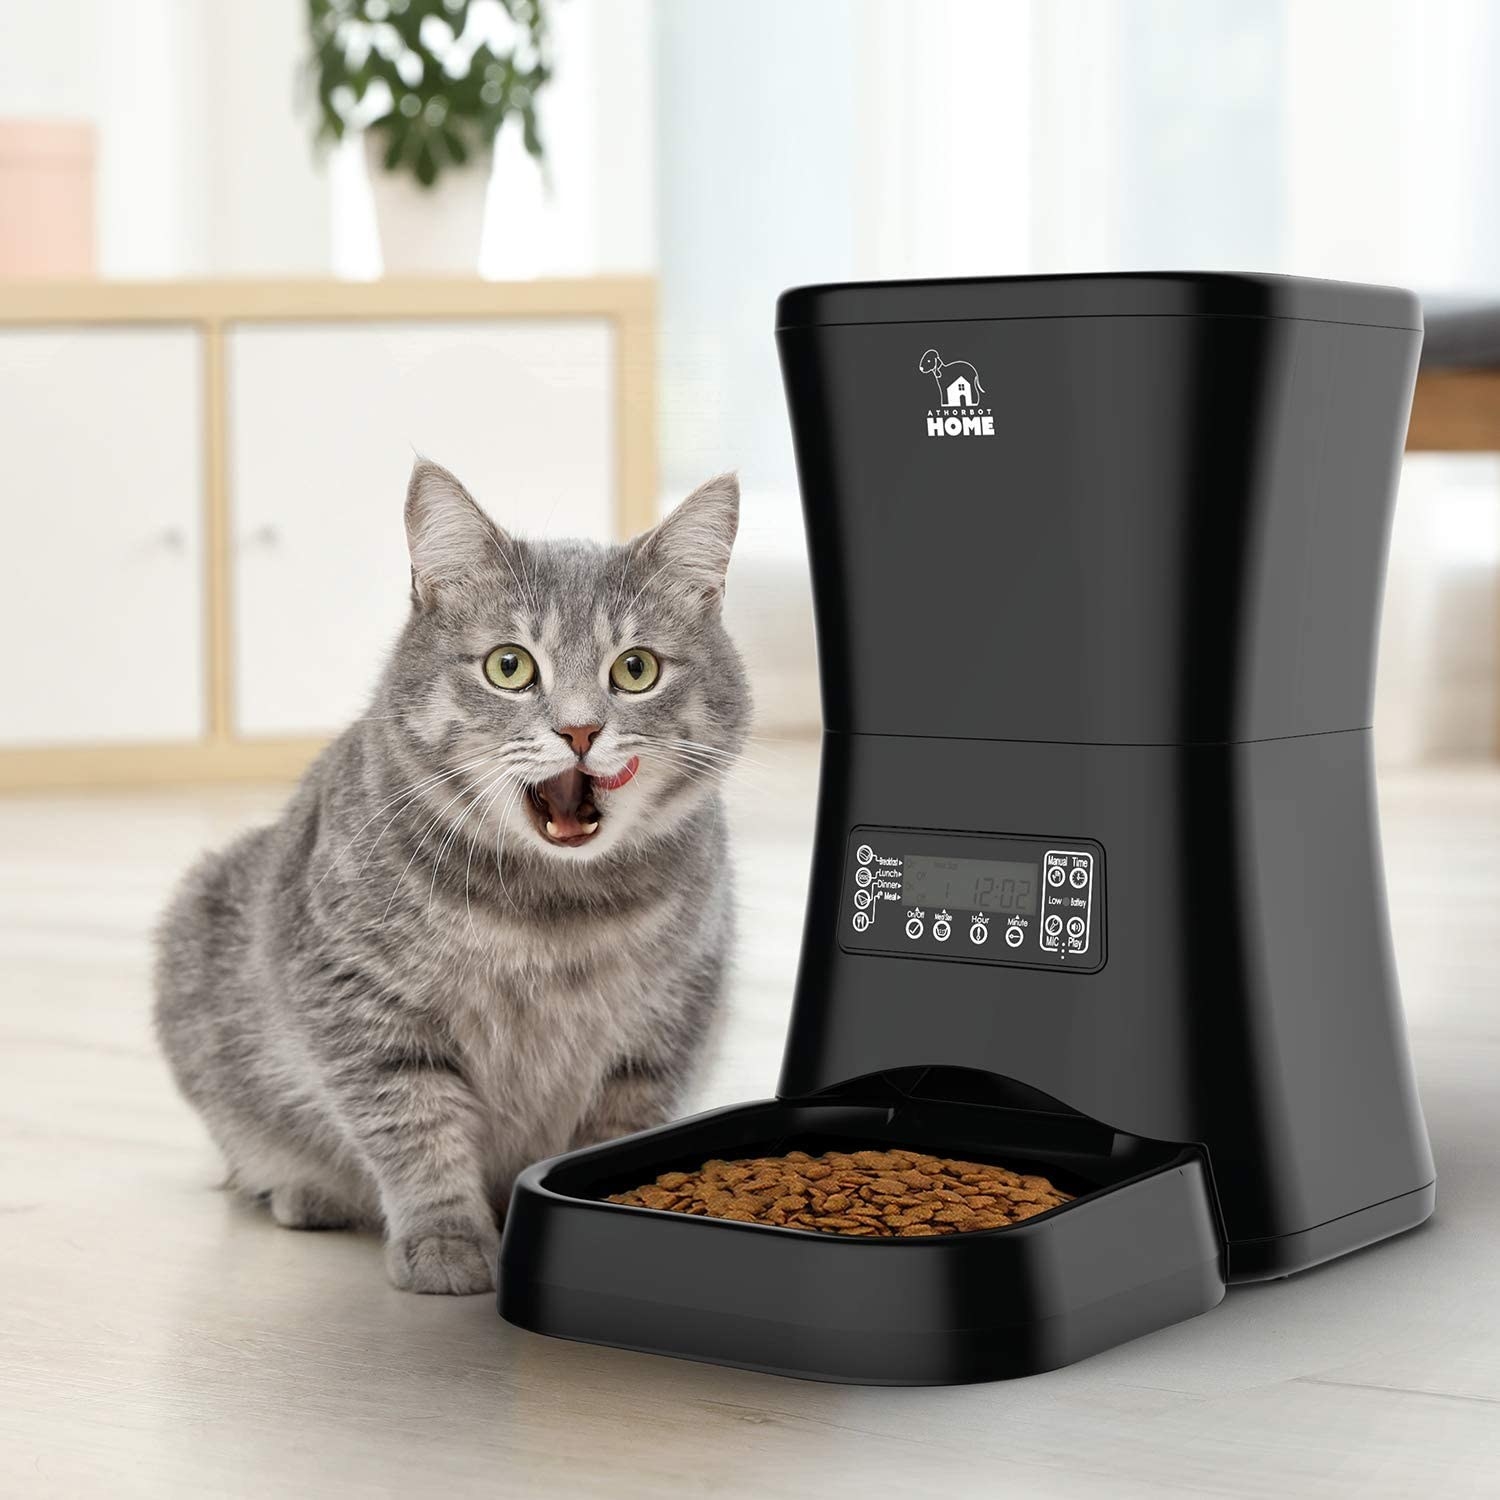 A cat eating from the dispenser